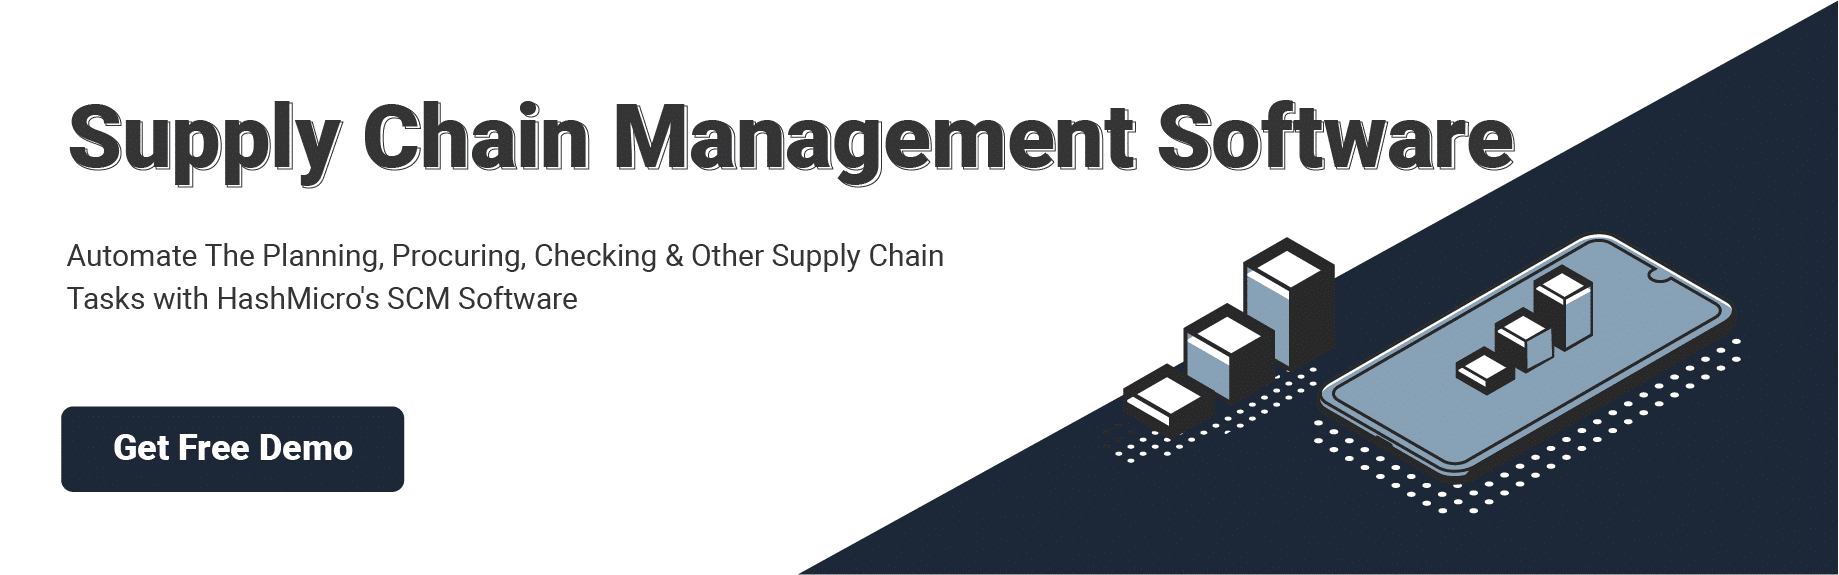 scm application software(https://www.hashmicro.com/supply-chain-management?)